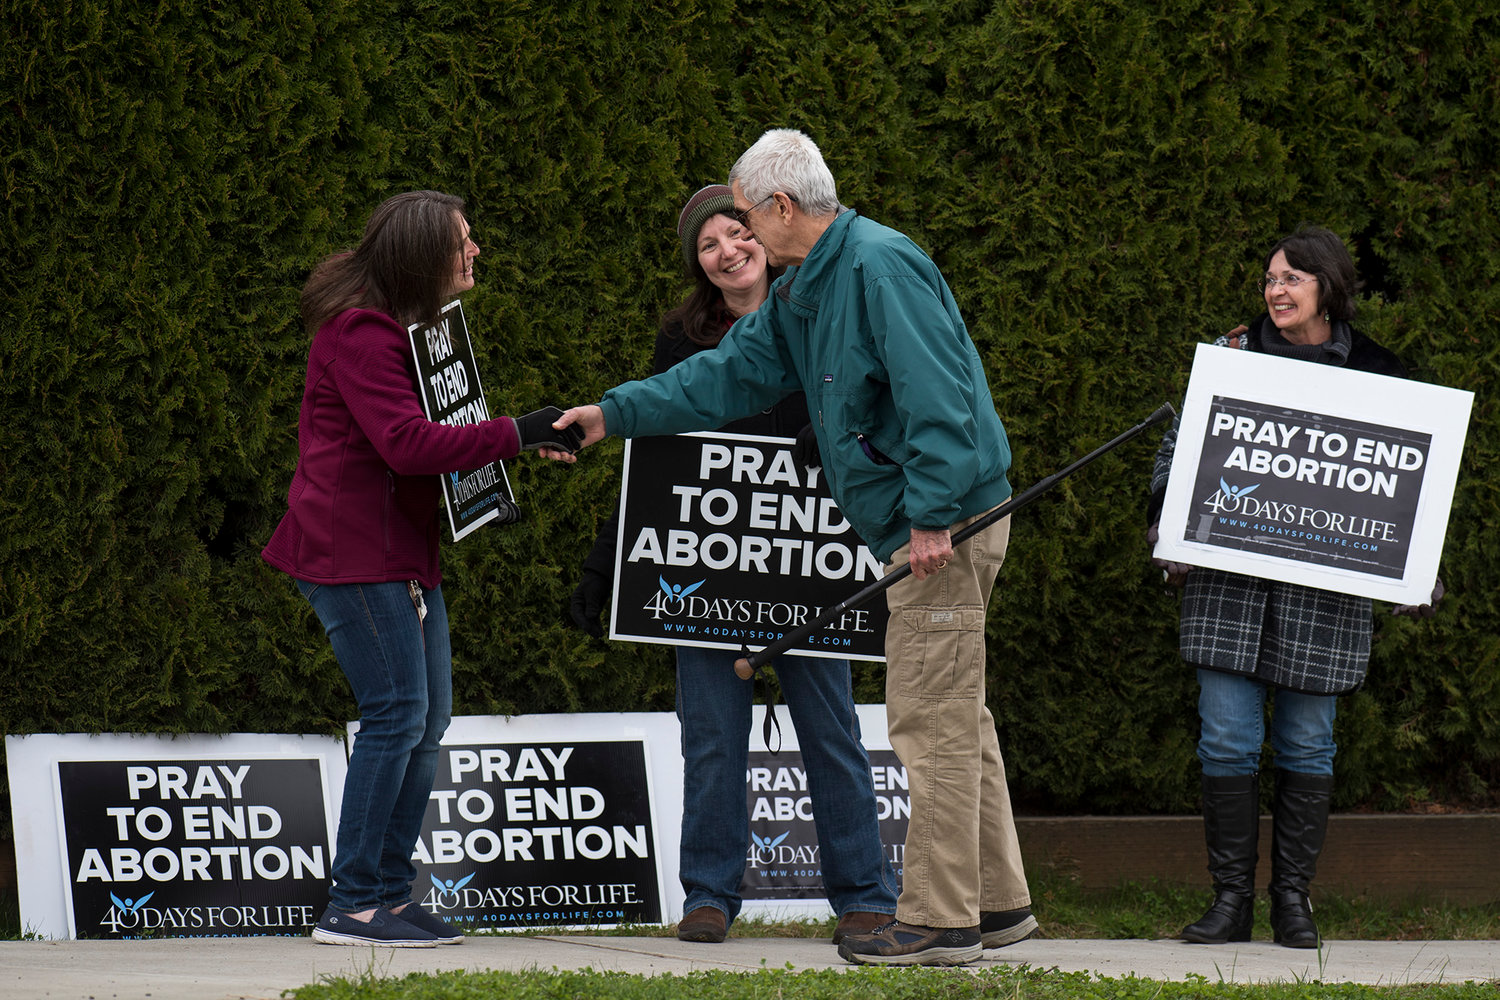 Laurie Robbins, of Centralia, left, greets Nick Radovcich, of Onalaska, as Karen Maxwell, left-center, of Centralia, and ida Clary, Evaline, look on as they participate in the 40 Days for Life prayer vigil outside the Centralia Planned Parenthood on Monday afternoon.